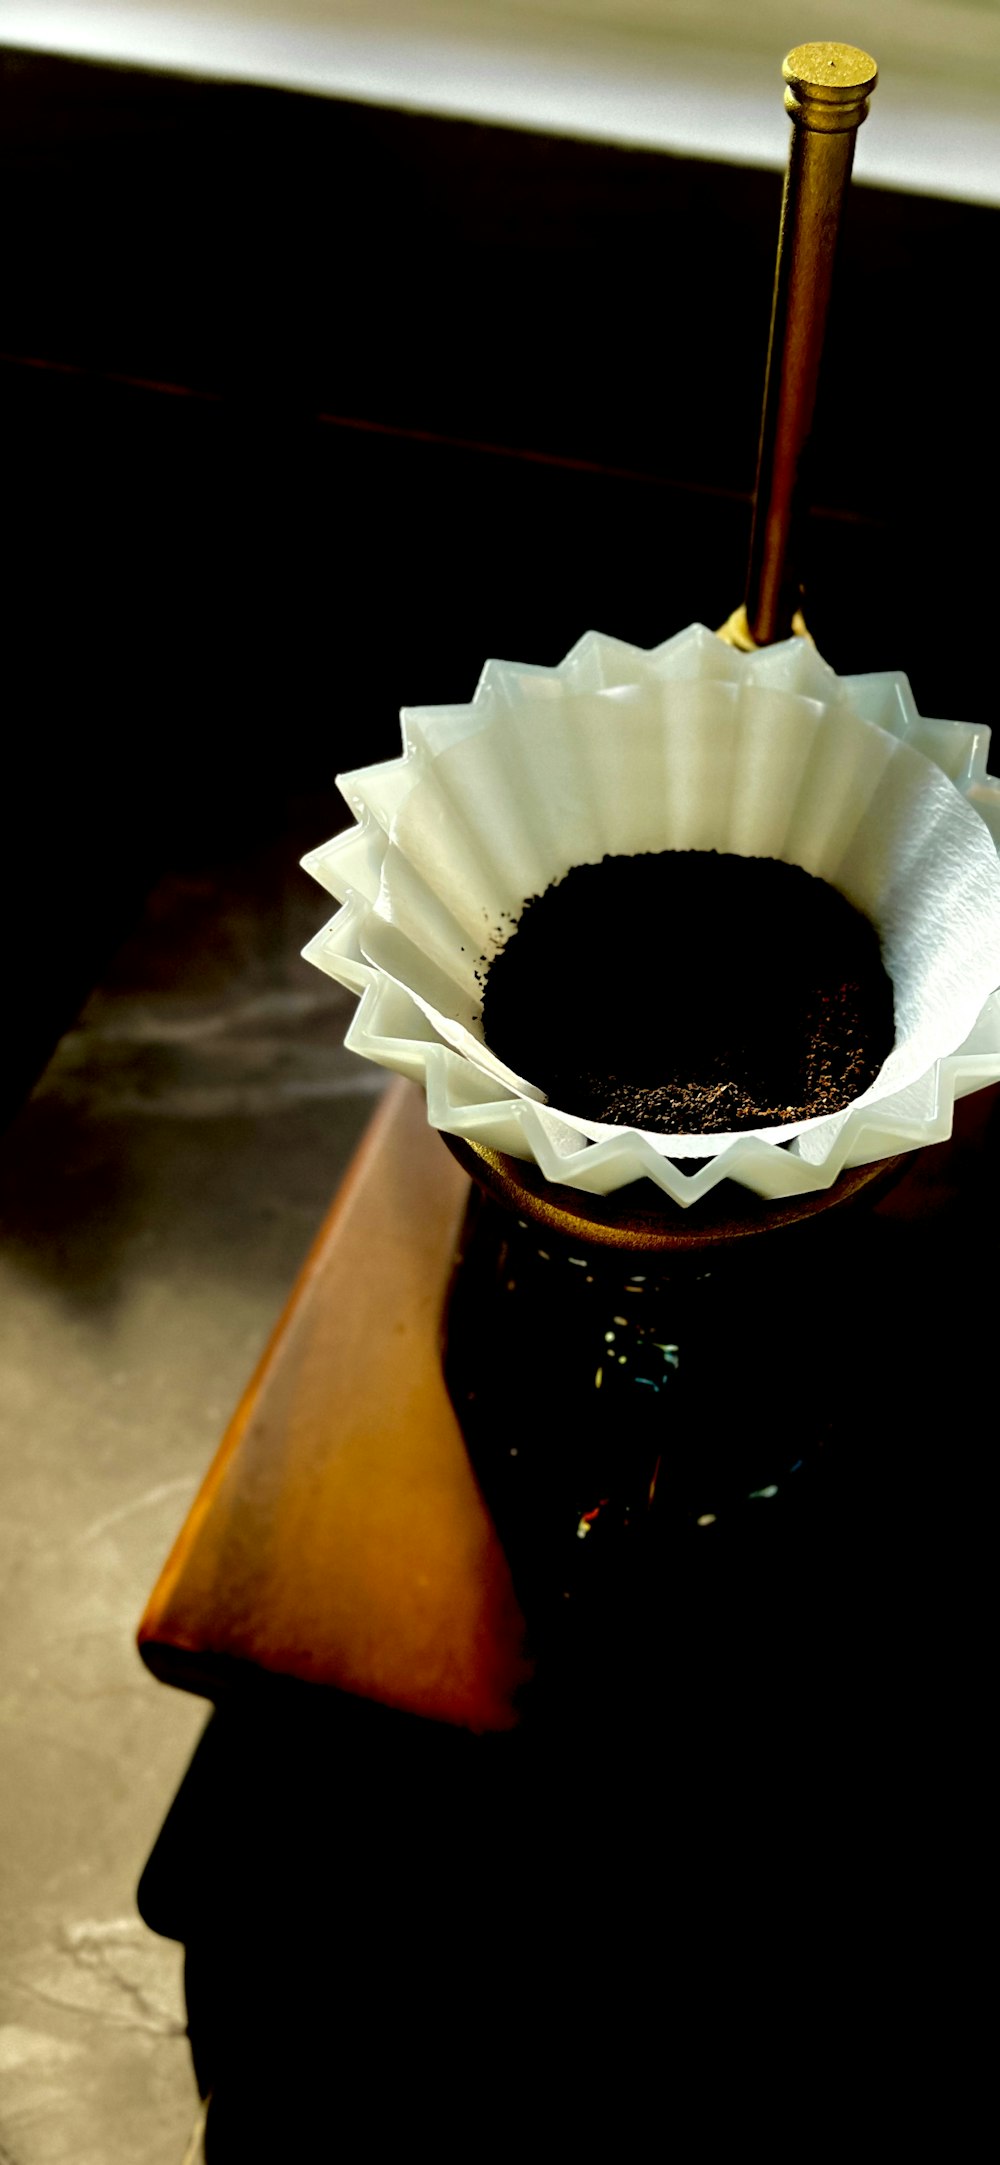 a chocolate cake in a paper cup on a table